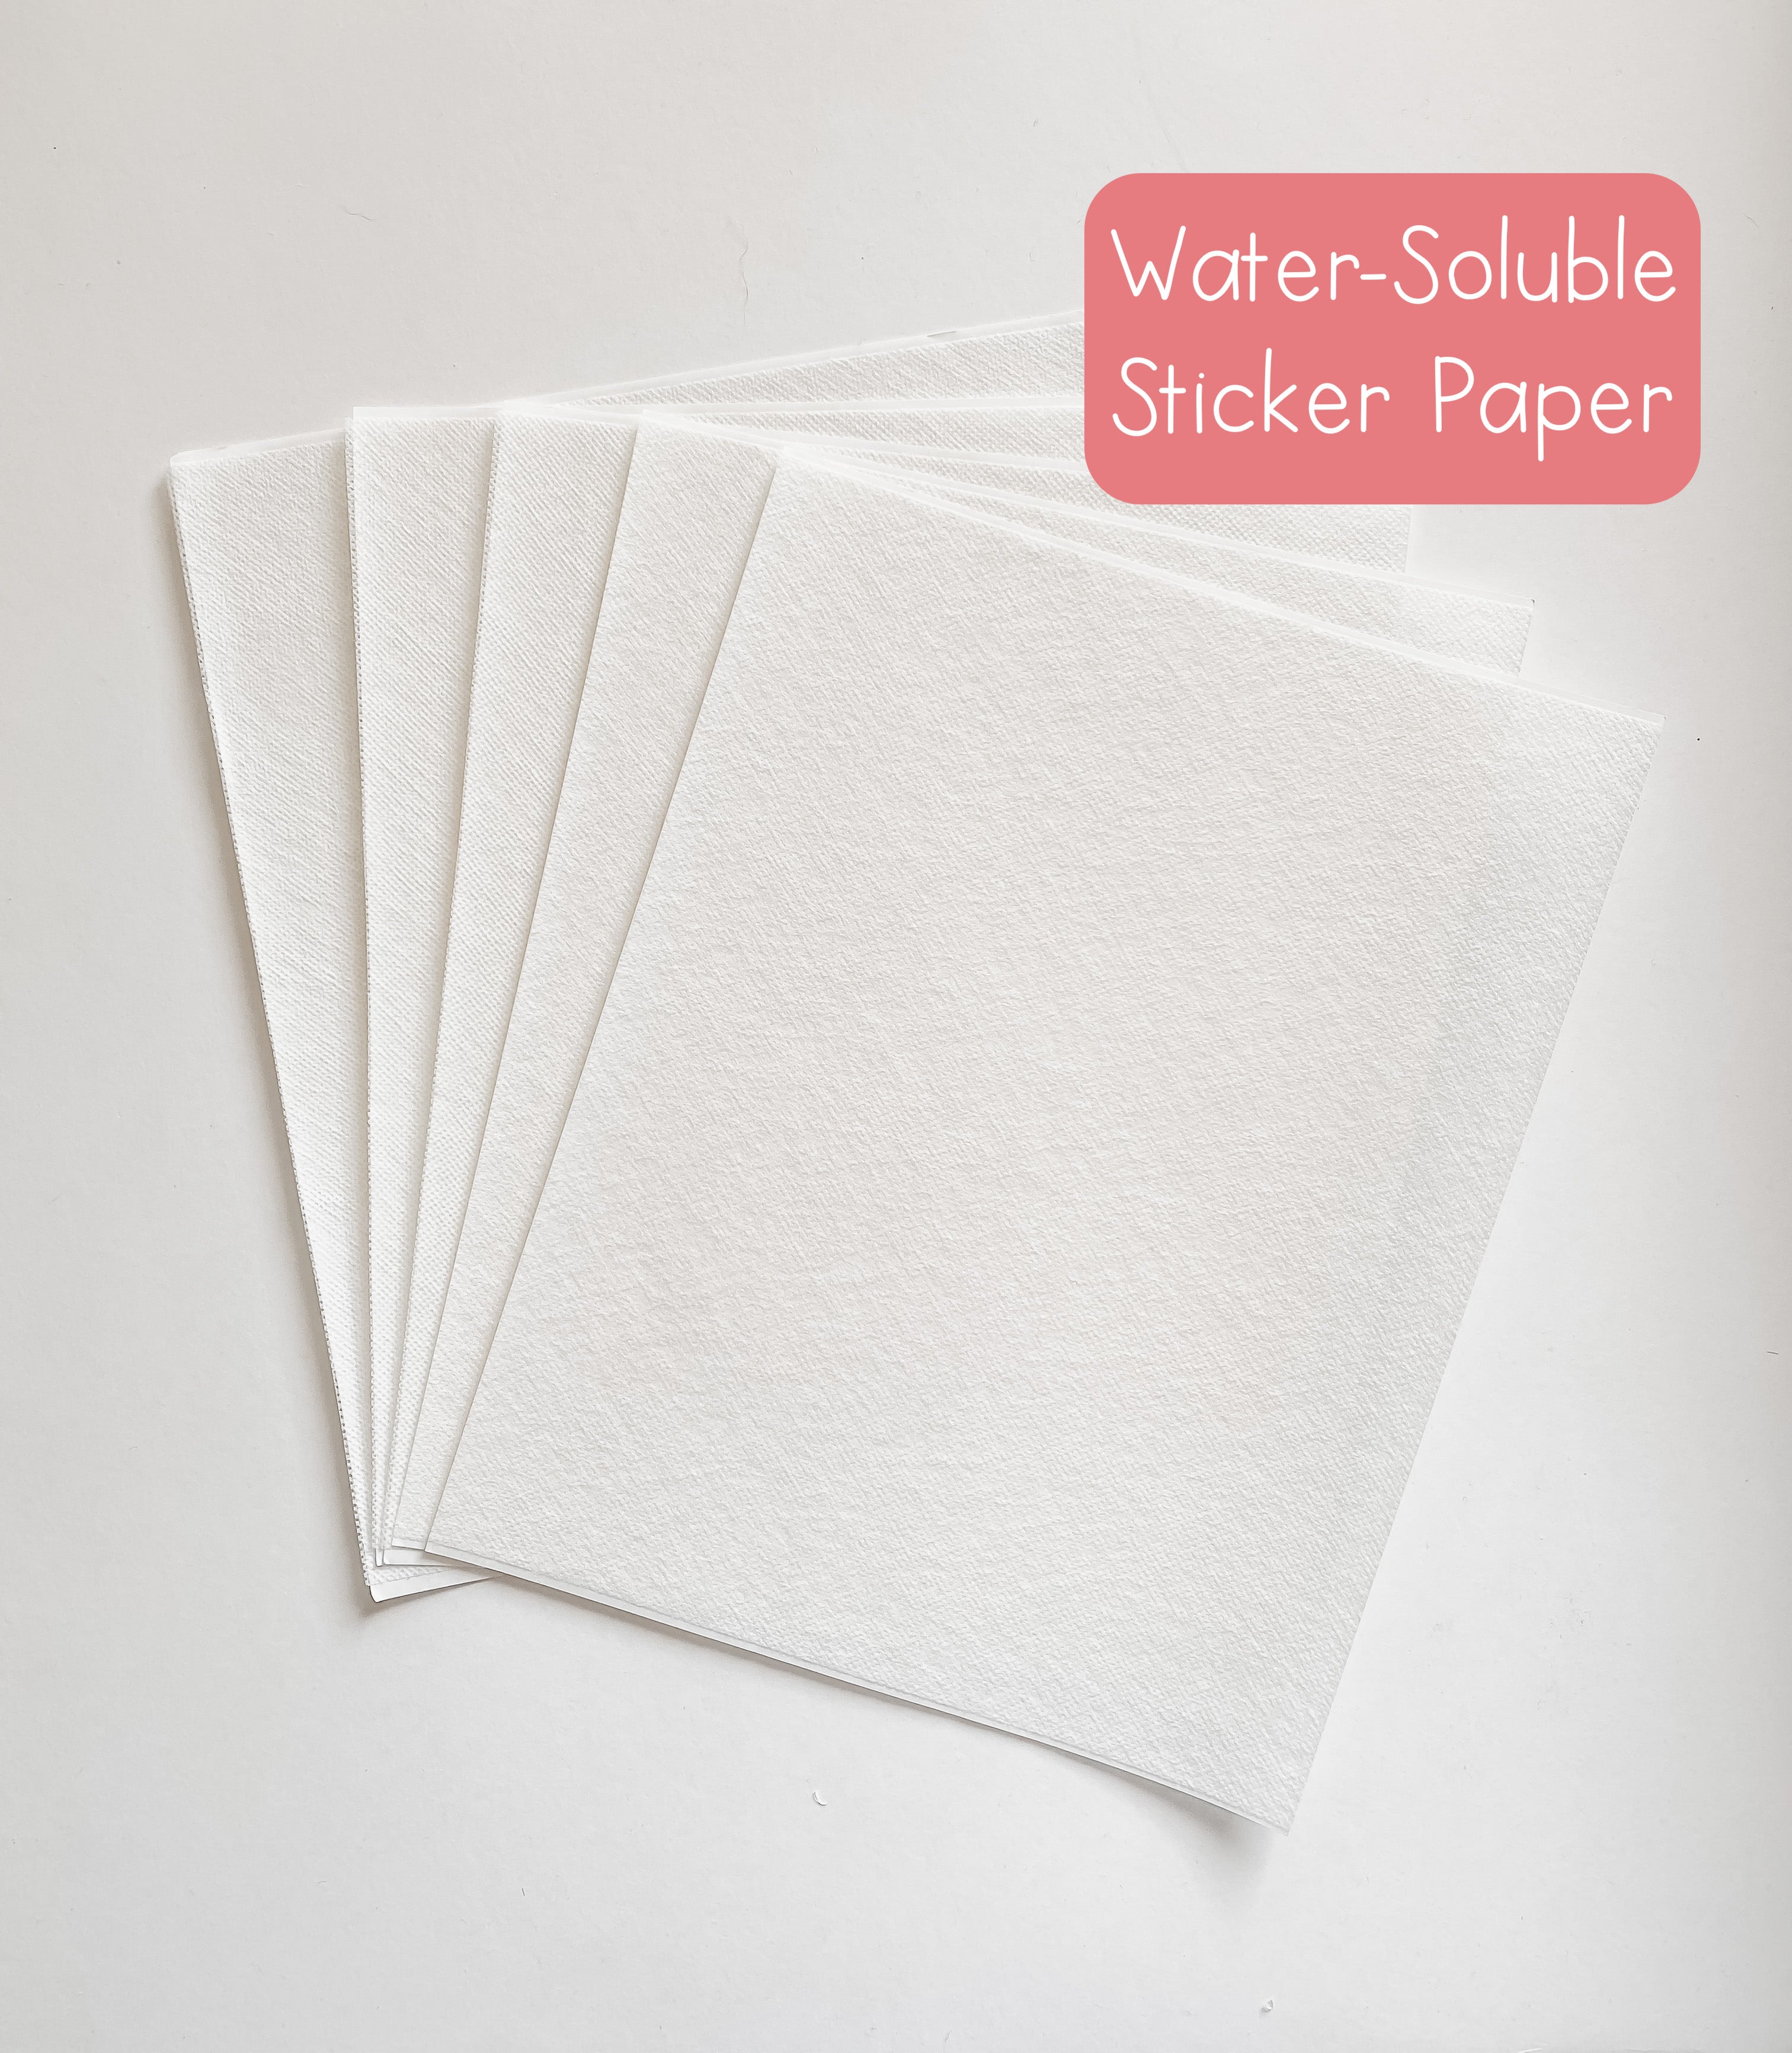 Water-Soluble Sticker Paper